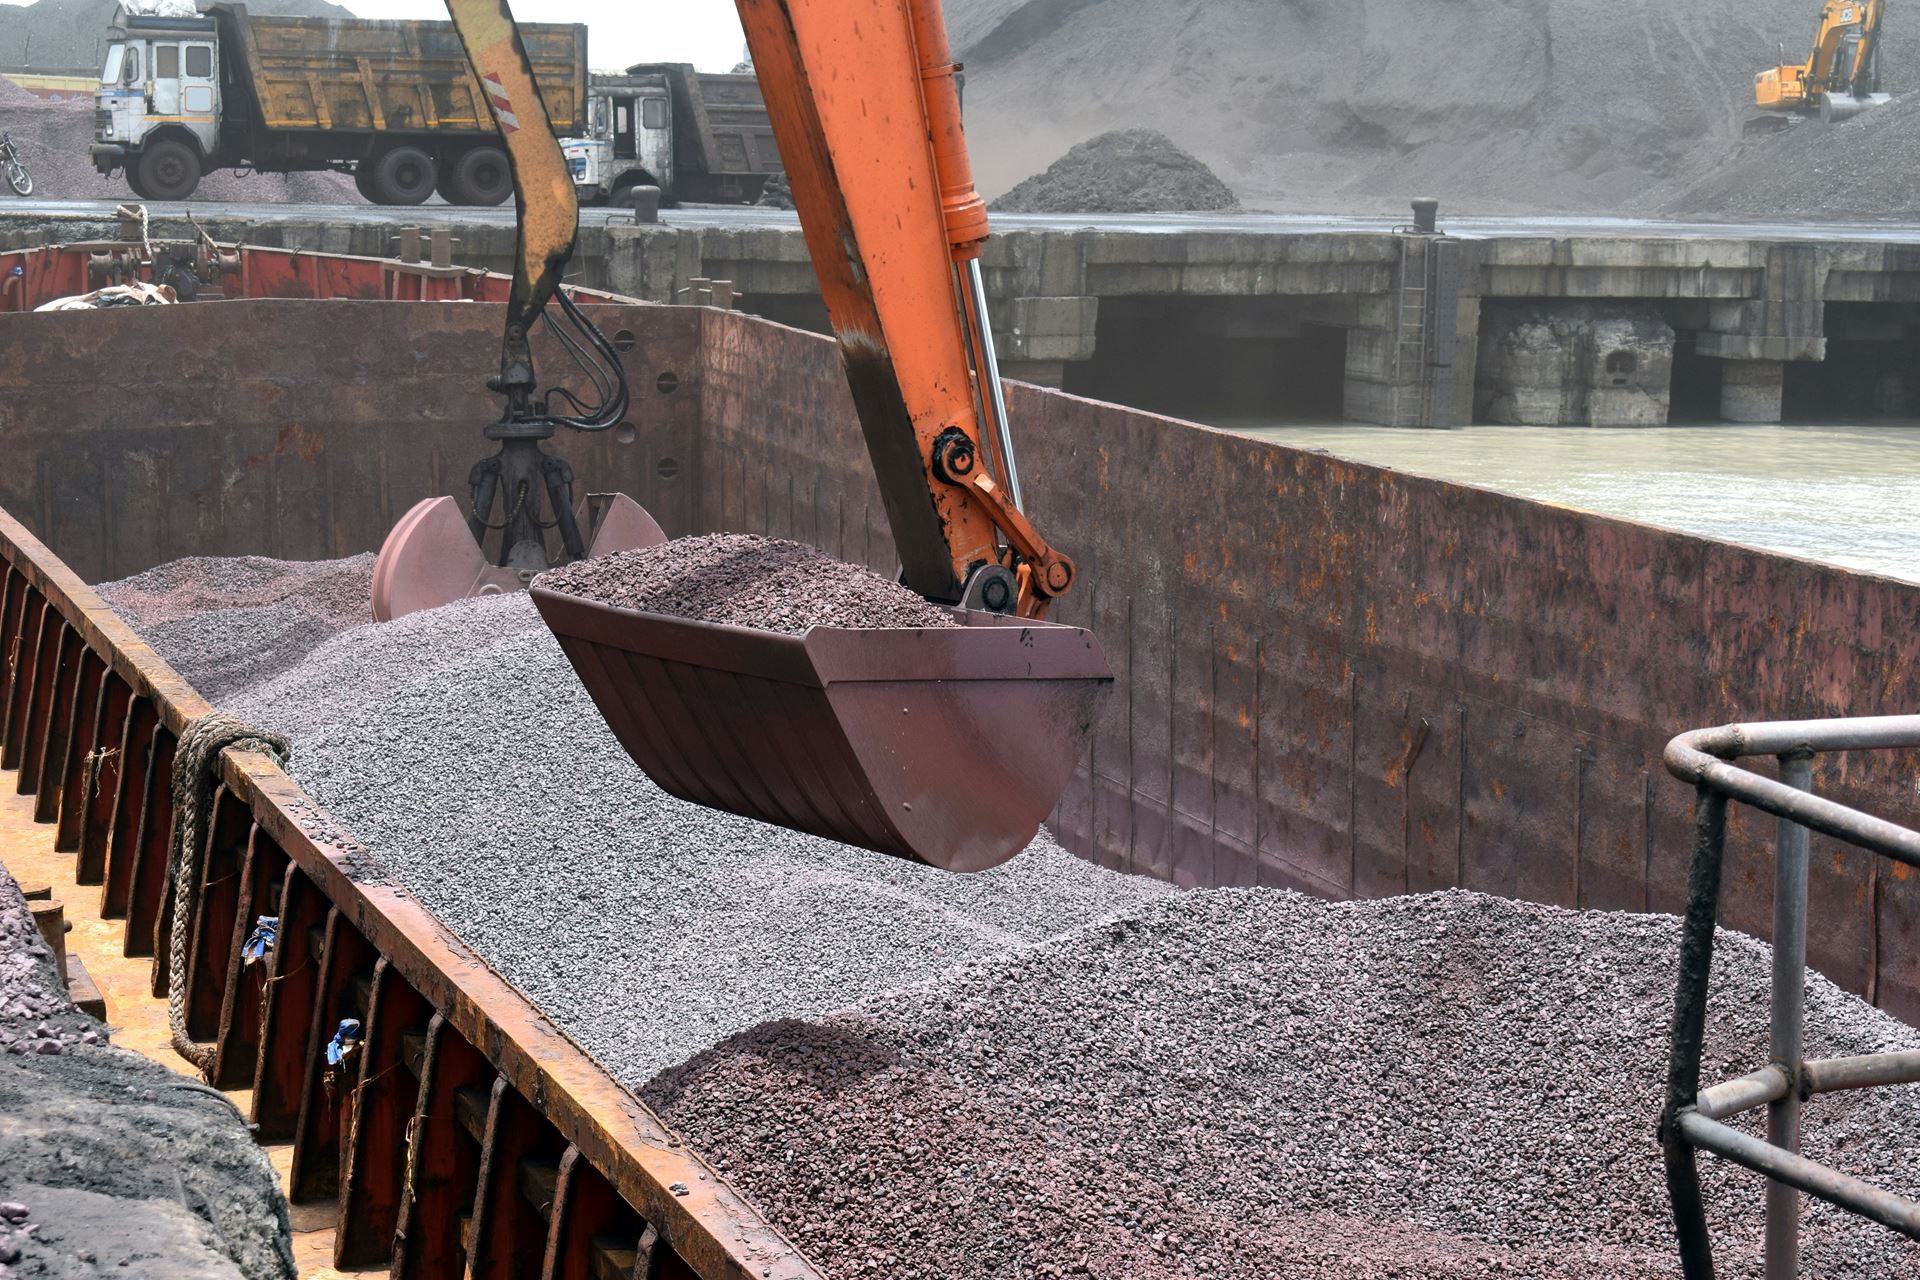 India is working on a new formula to set iron ore prices